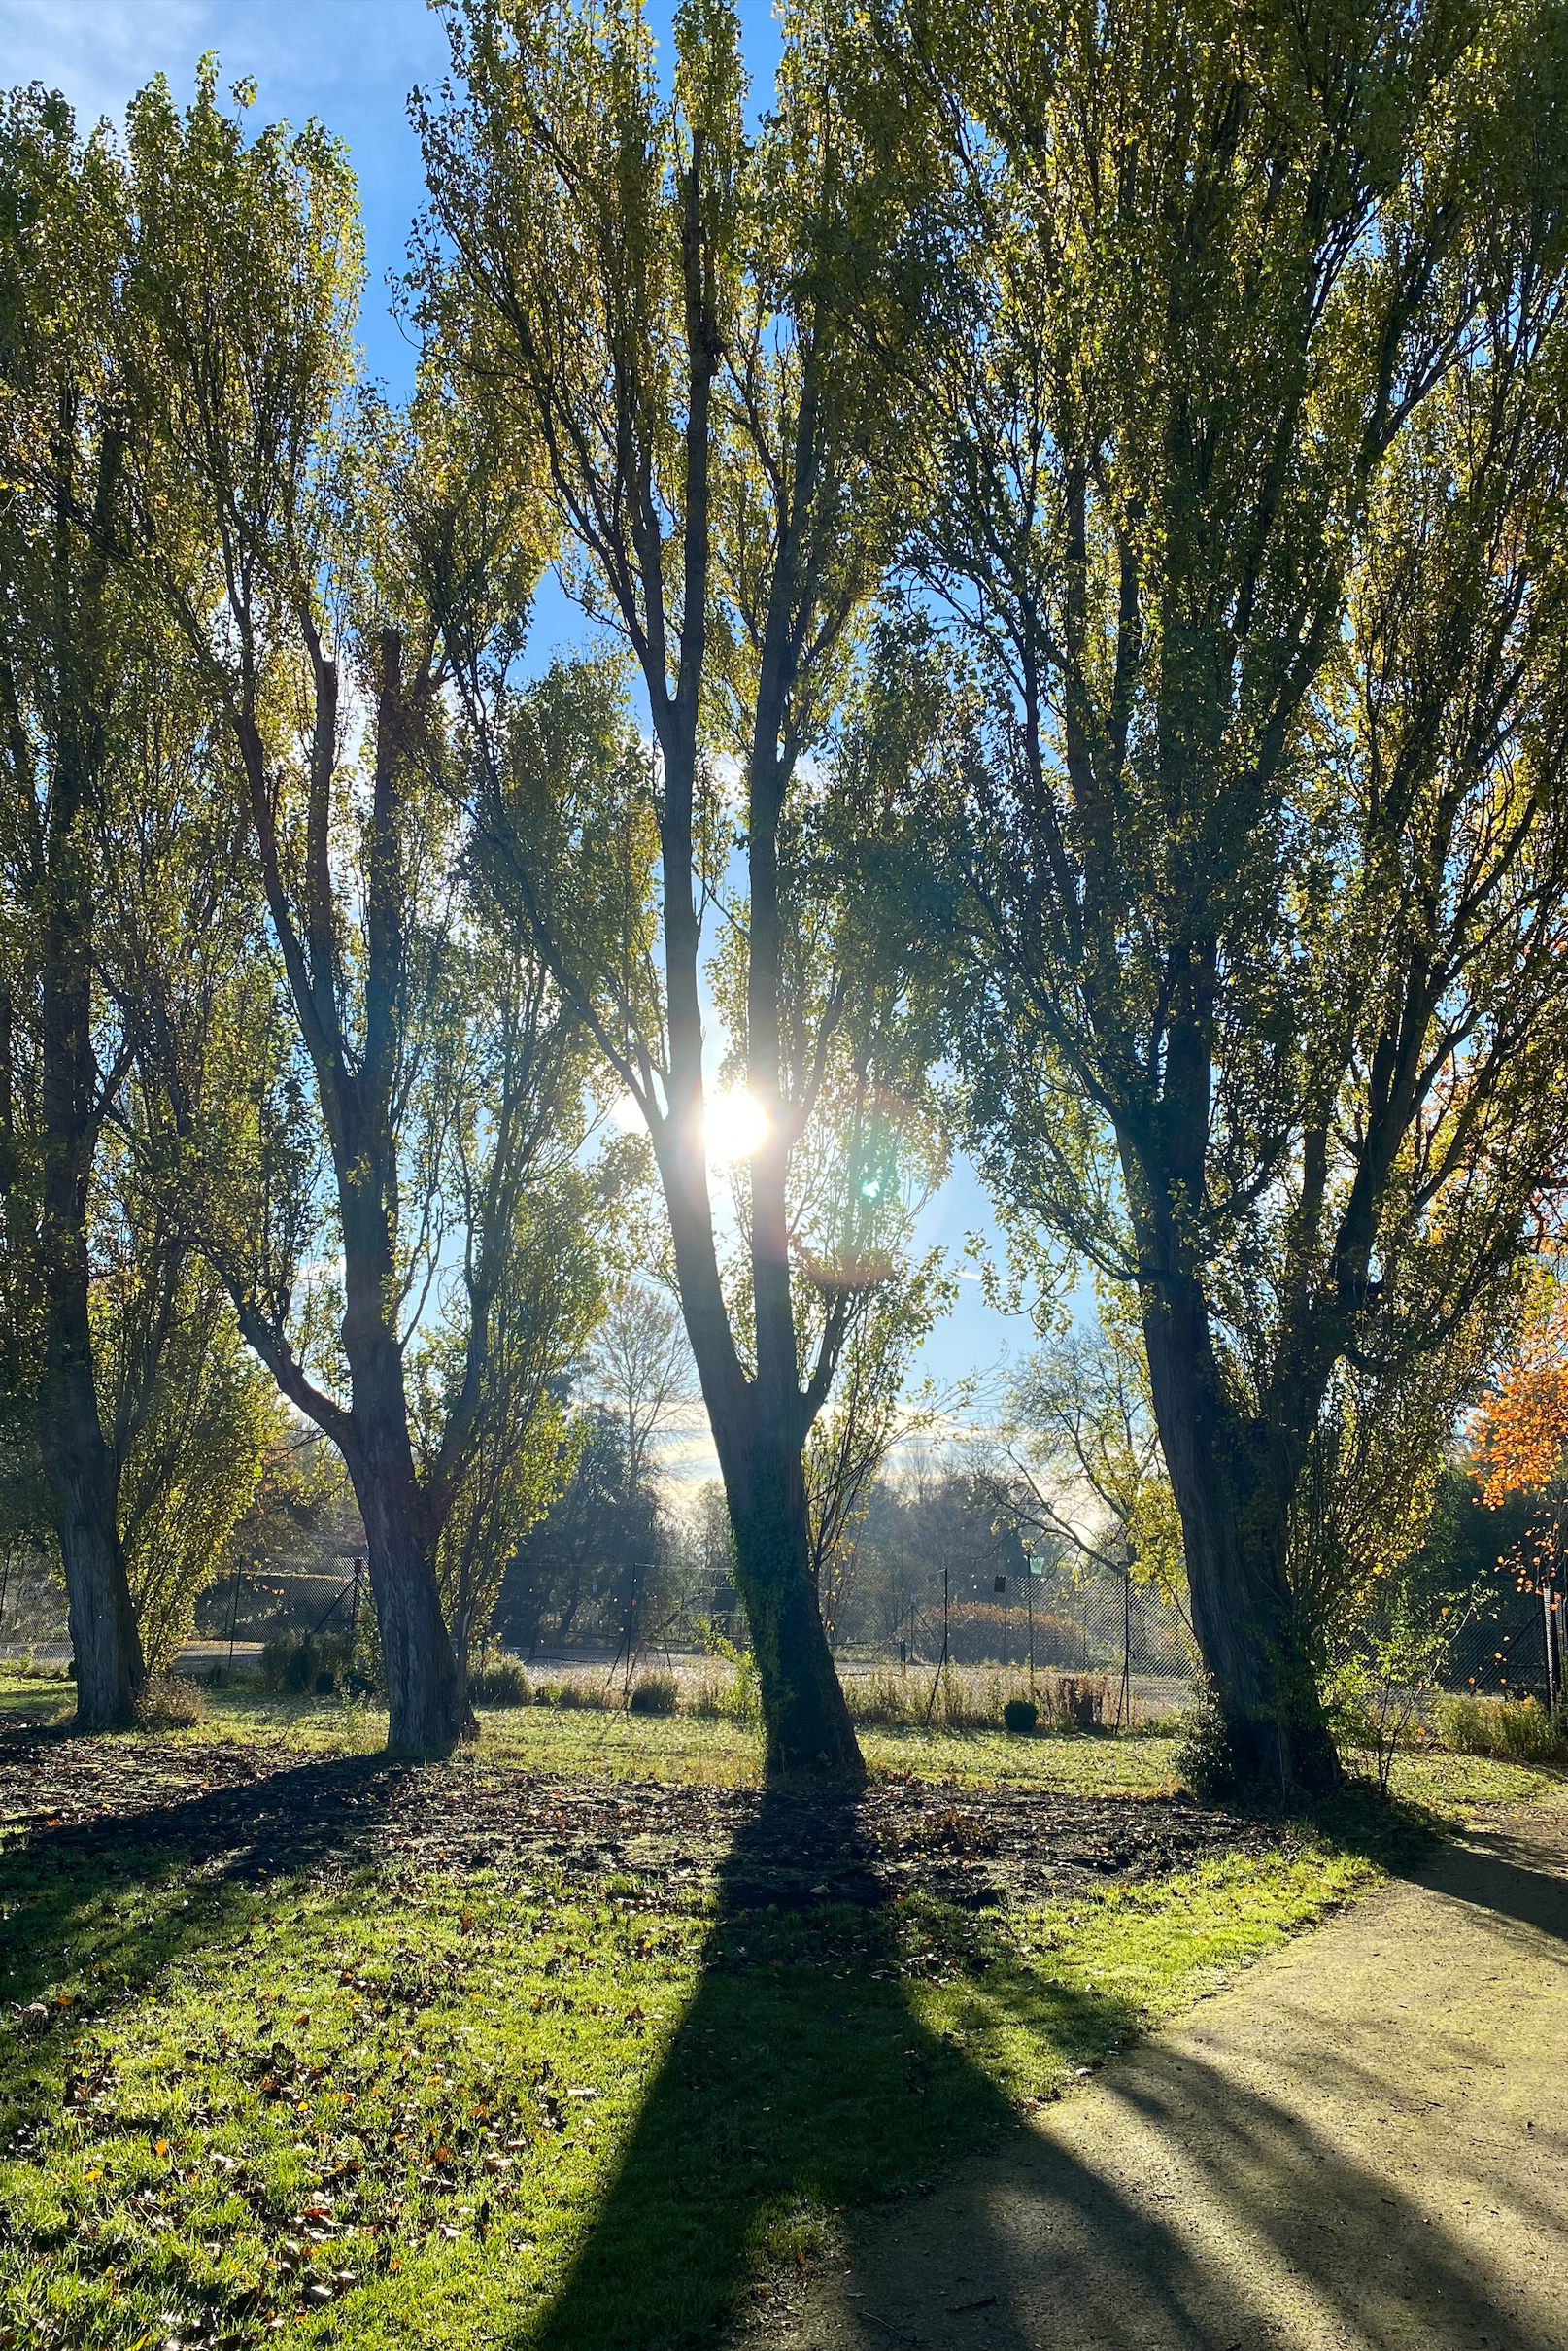 Photo by Tanya Hart - Sun shining through trees in front of tennis courts at LMH